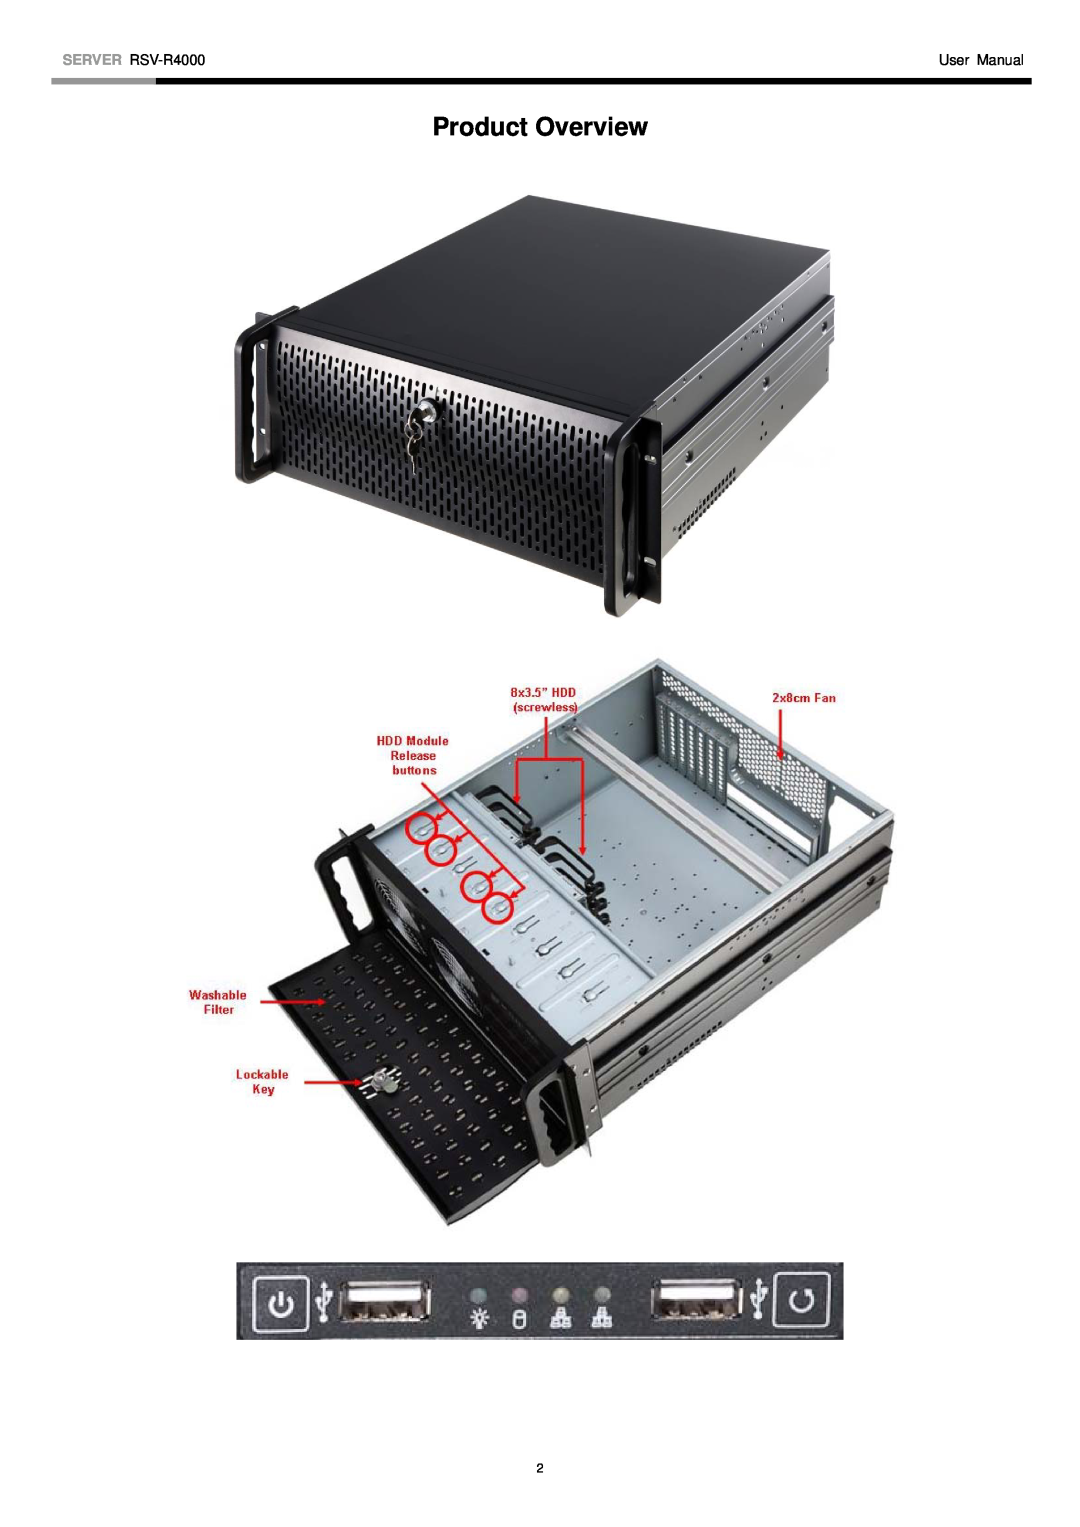 Rosewill user manual Product Overview, SERVER RSV-R4000, User Manual 